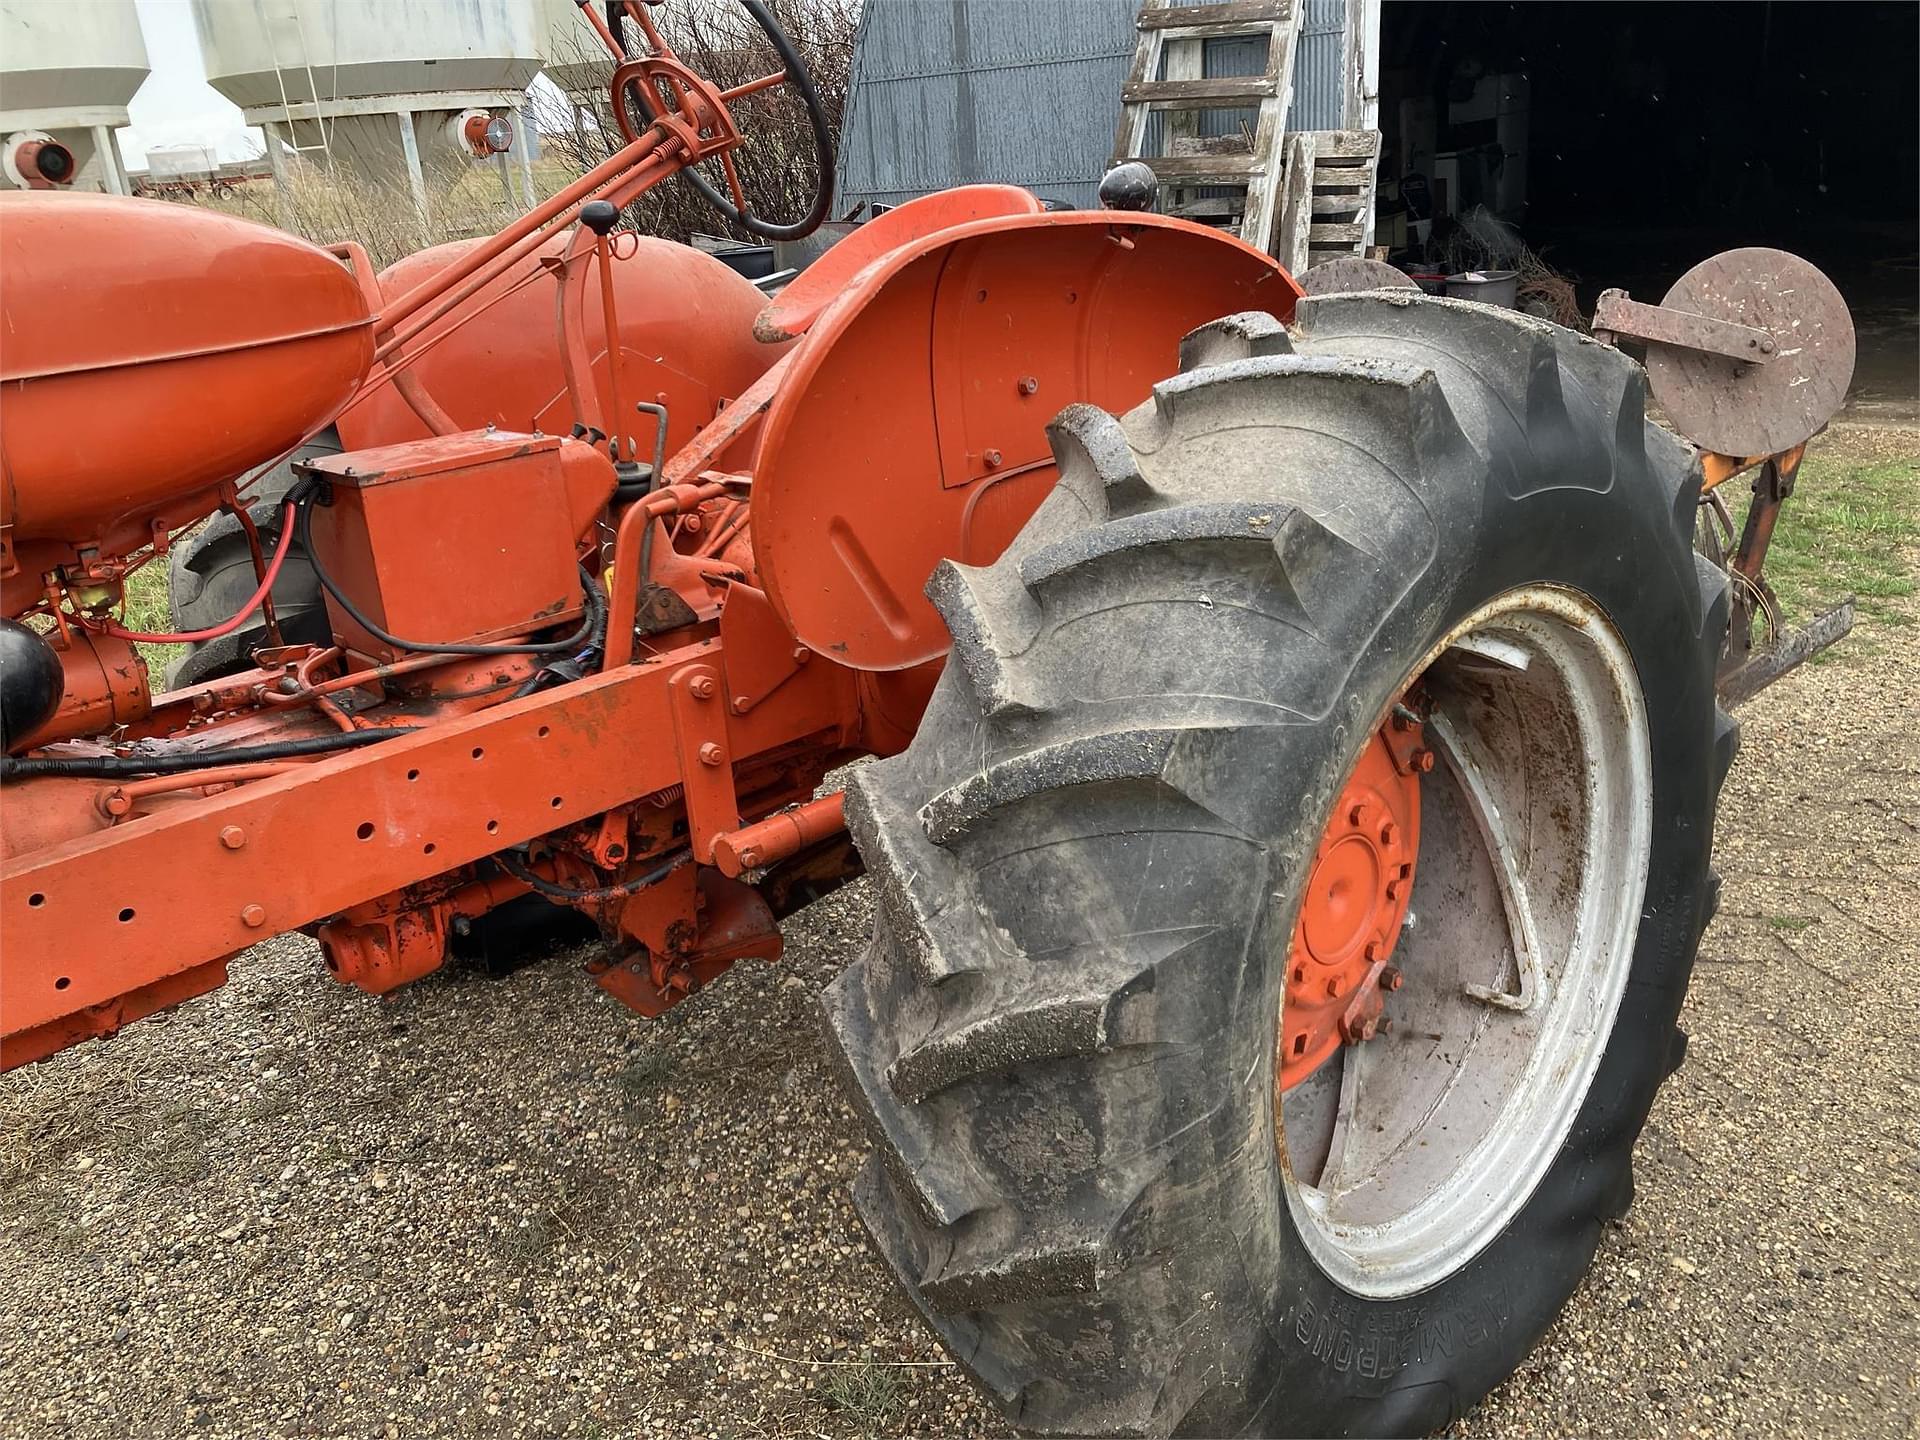 Main image Allis Chalmers WD 4